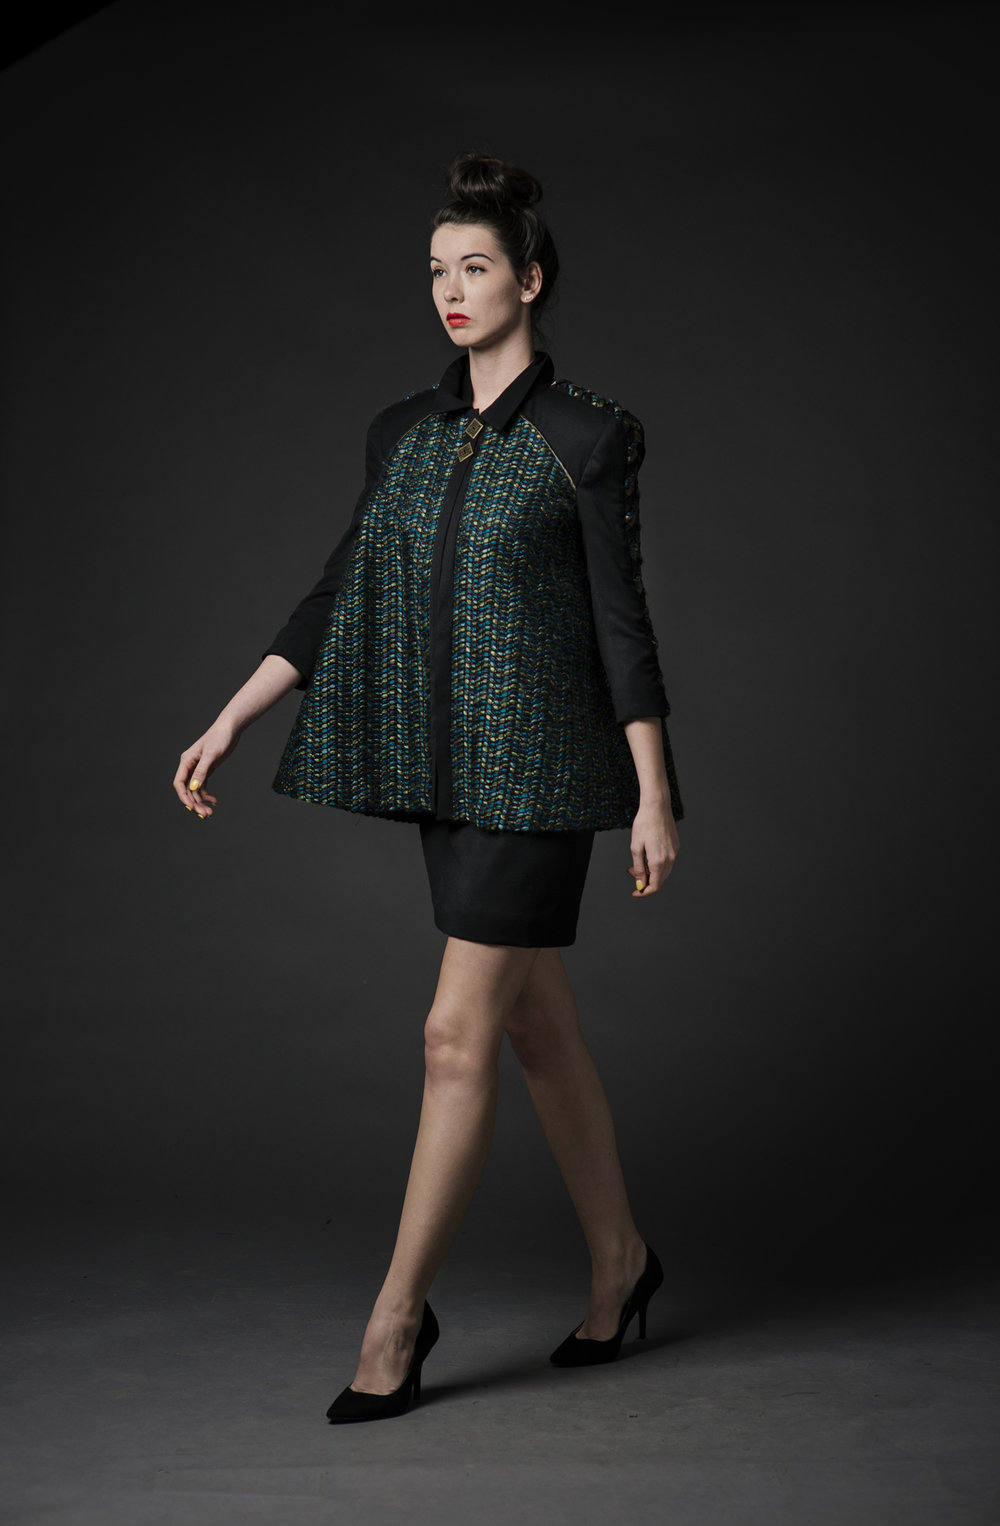 Woman modeling a black dress and a green jacket